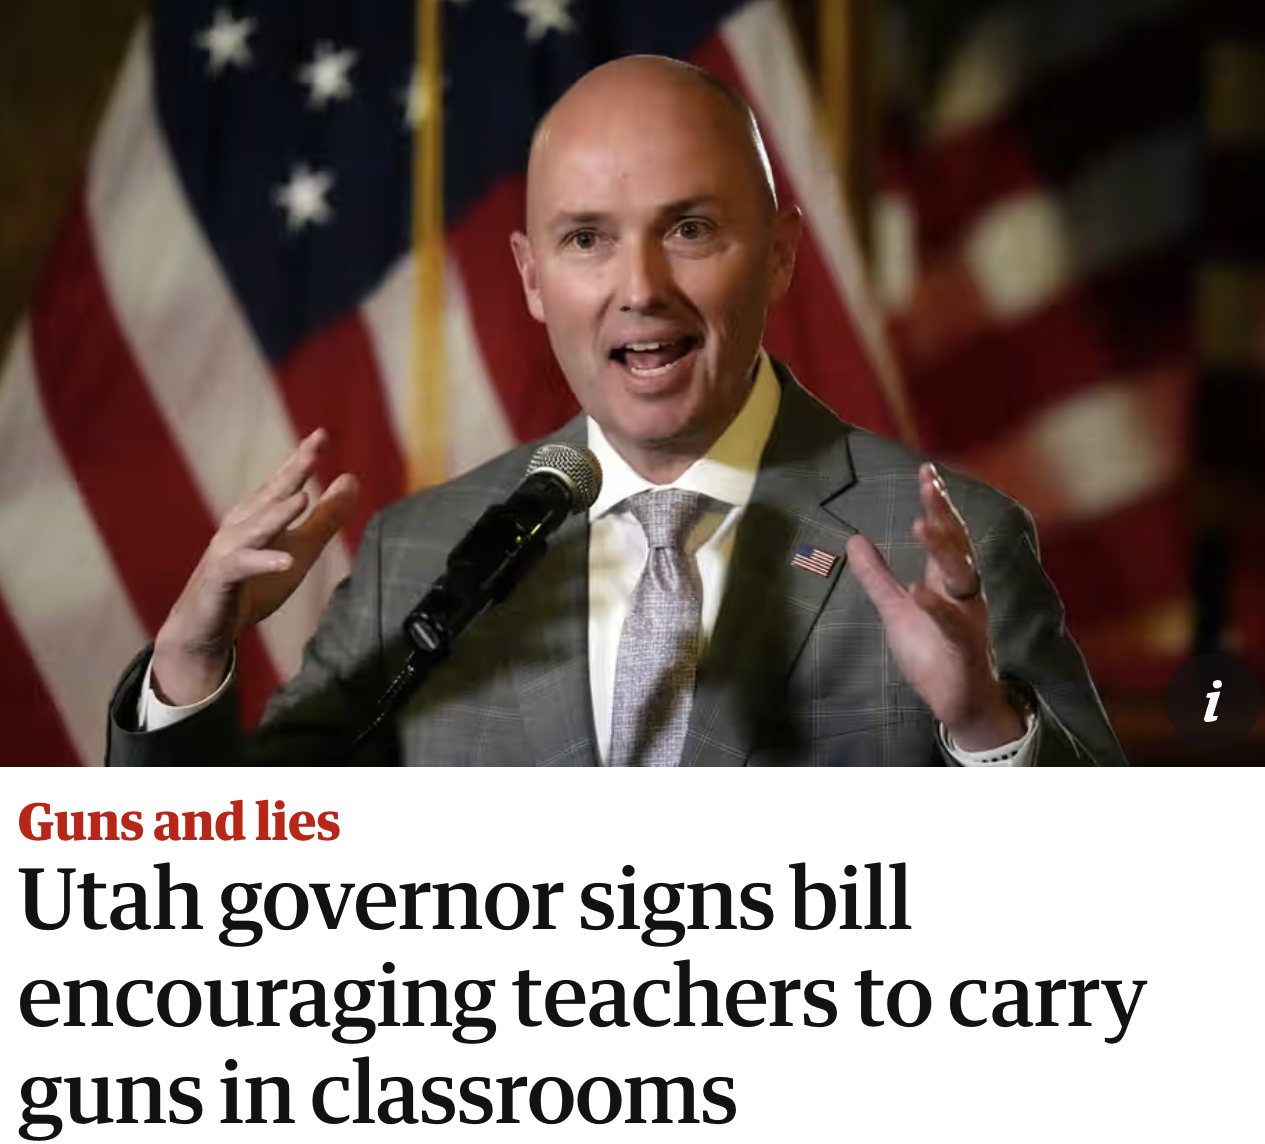 photo caption - Guns and lies Utah governor signs bill encouraging teachers to carry guns in classrooms i